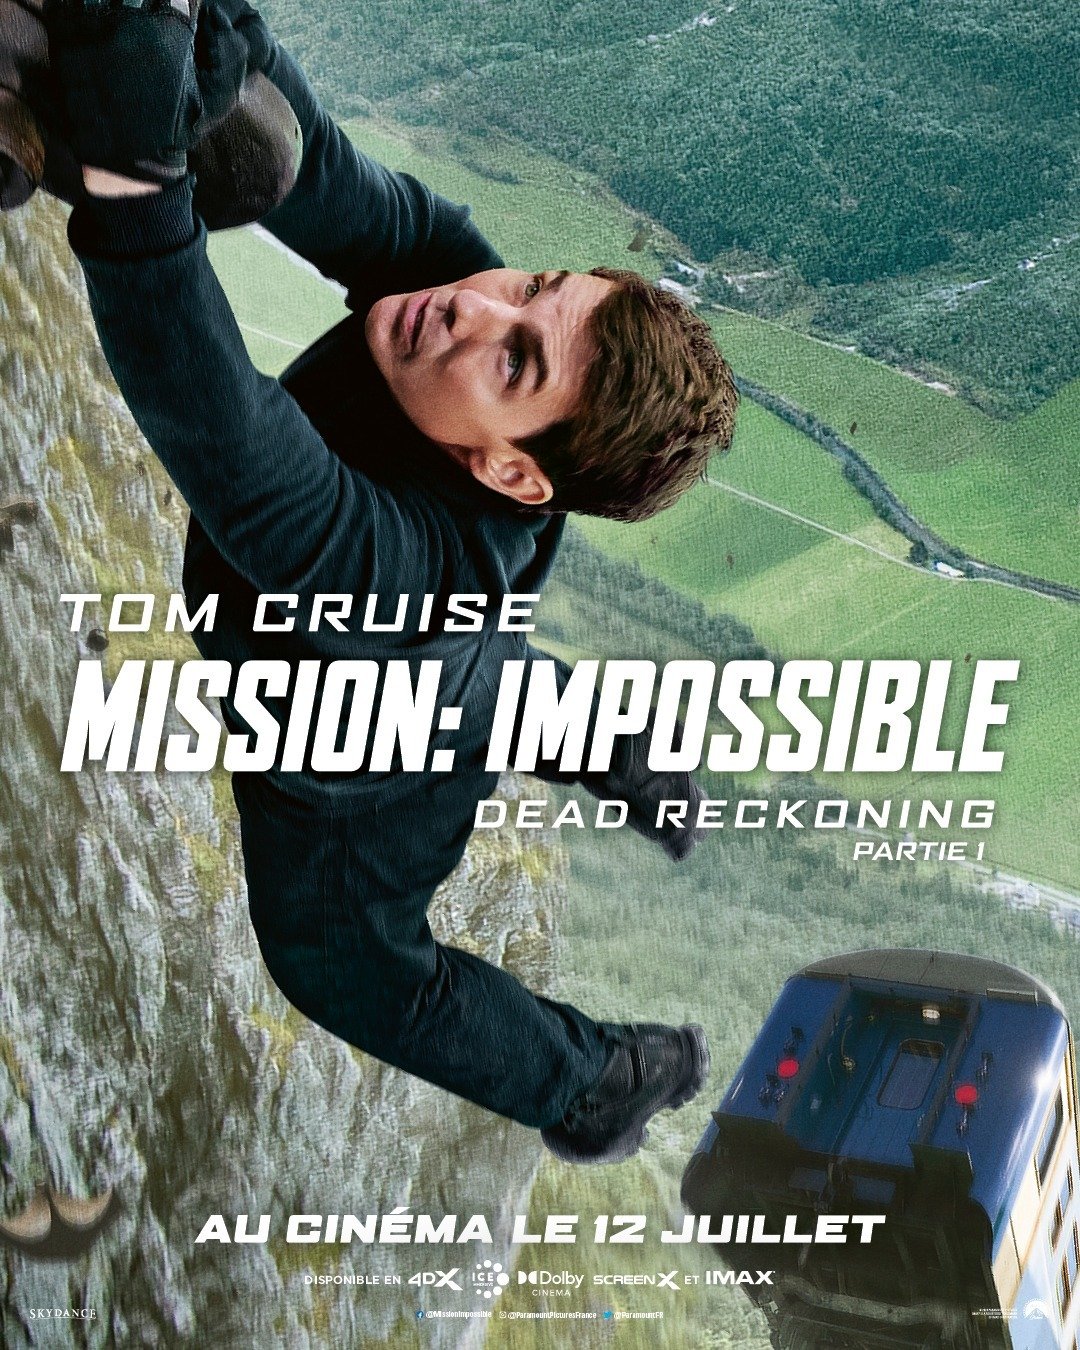 Mission: Impossible – Dead Reckoning Partie 1 streaming vf gratuit